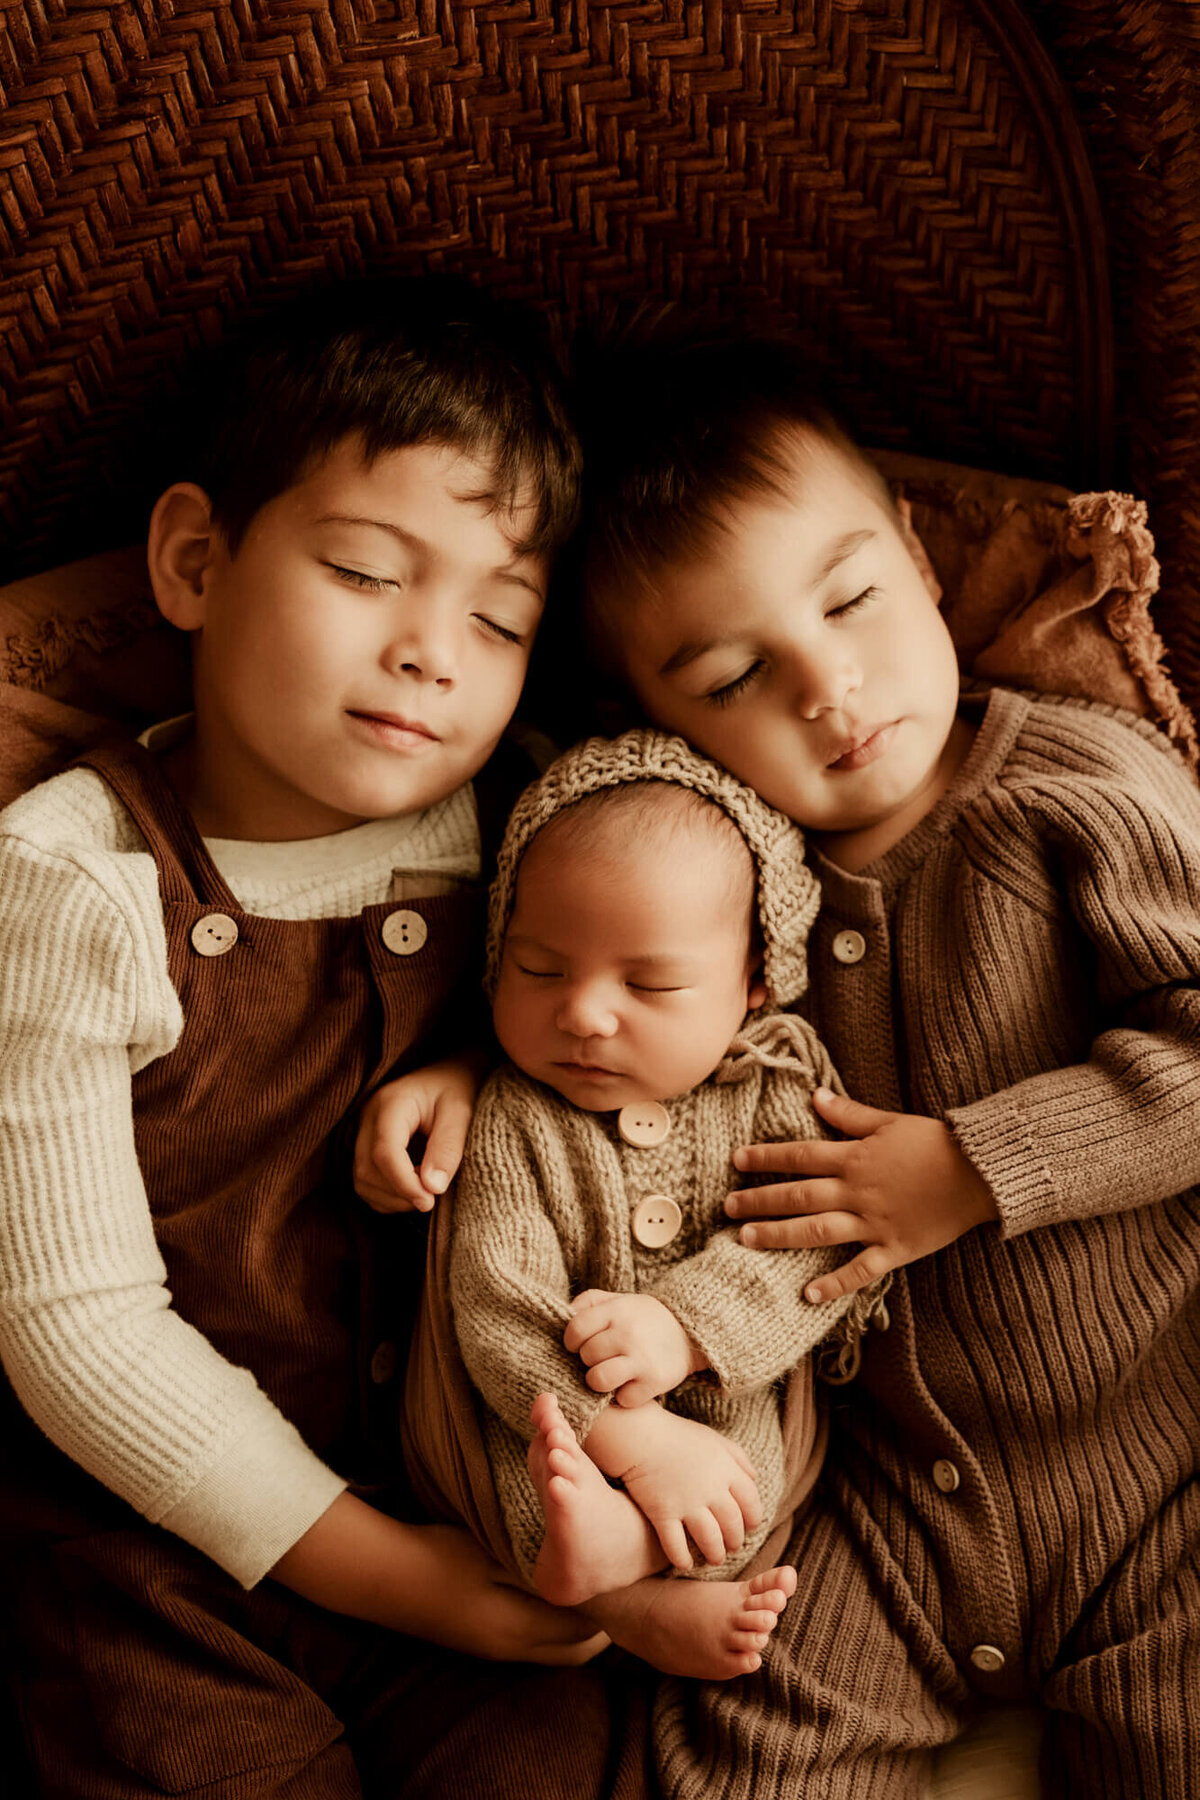 Two brothers snuggle their newborn baby brother as he sleeps.